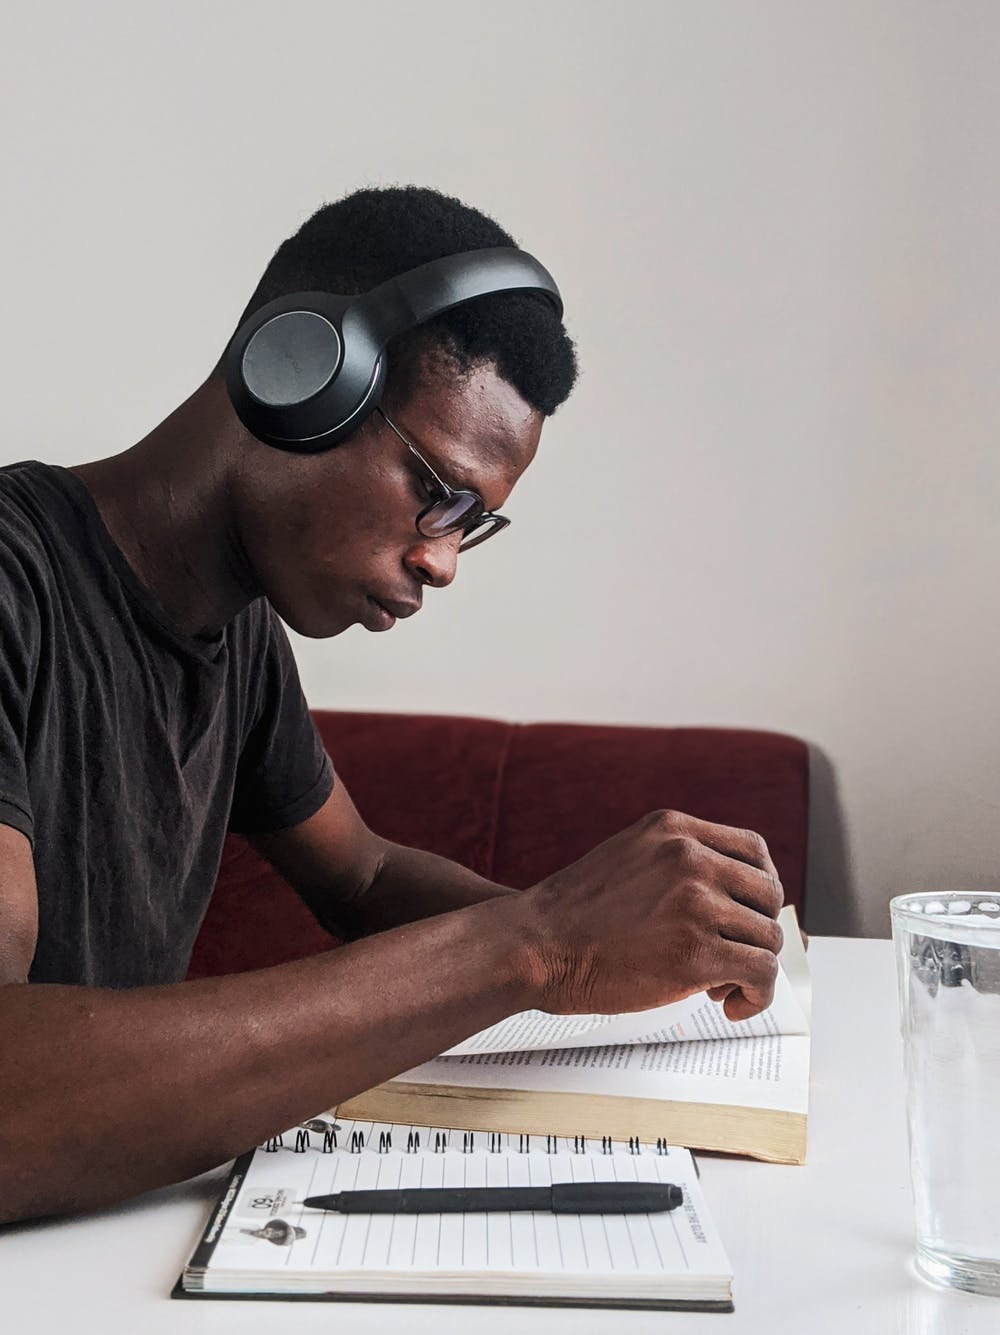 Student wearing headphones reading a book